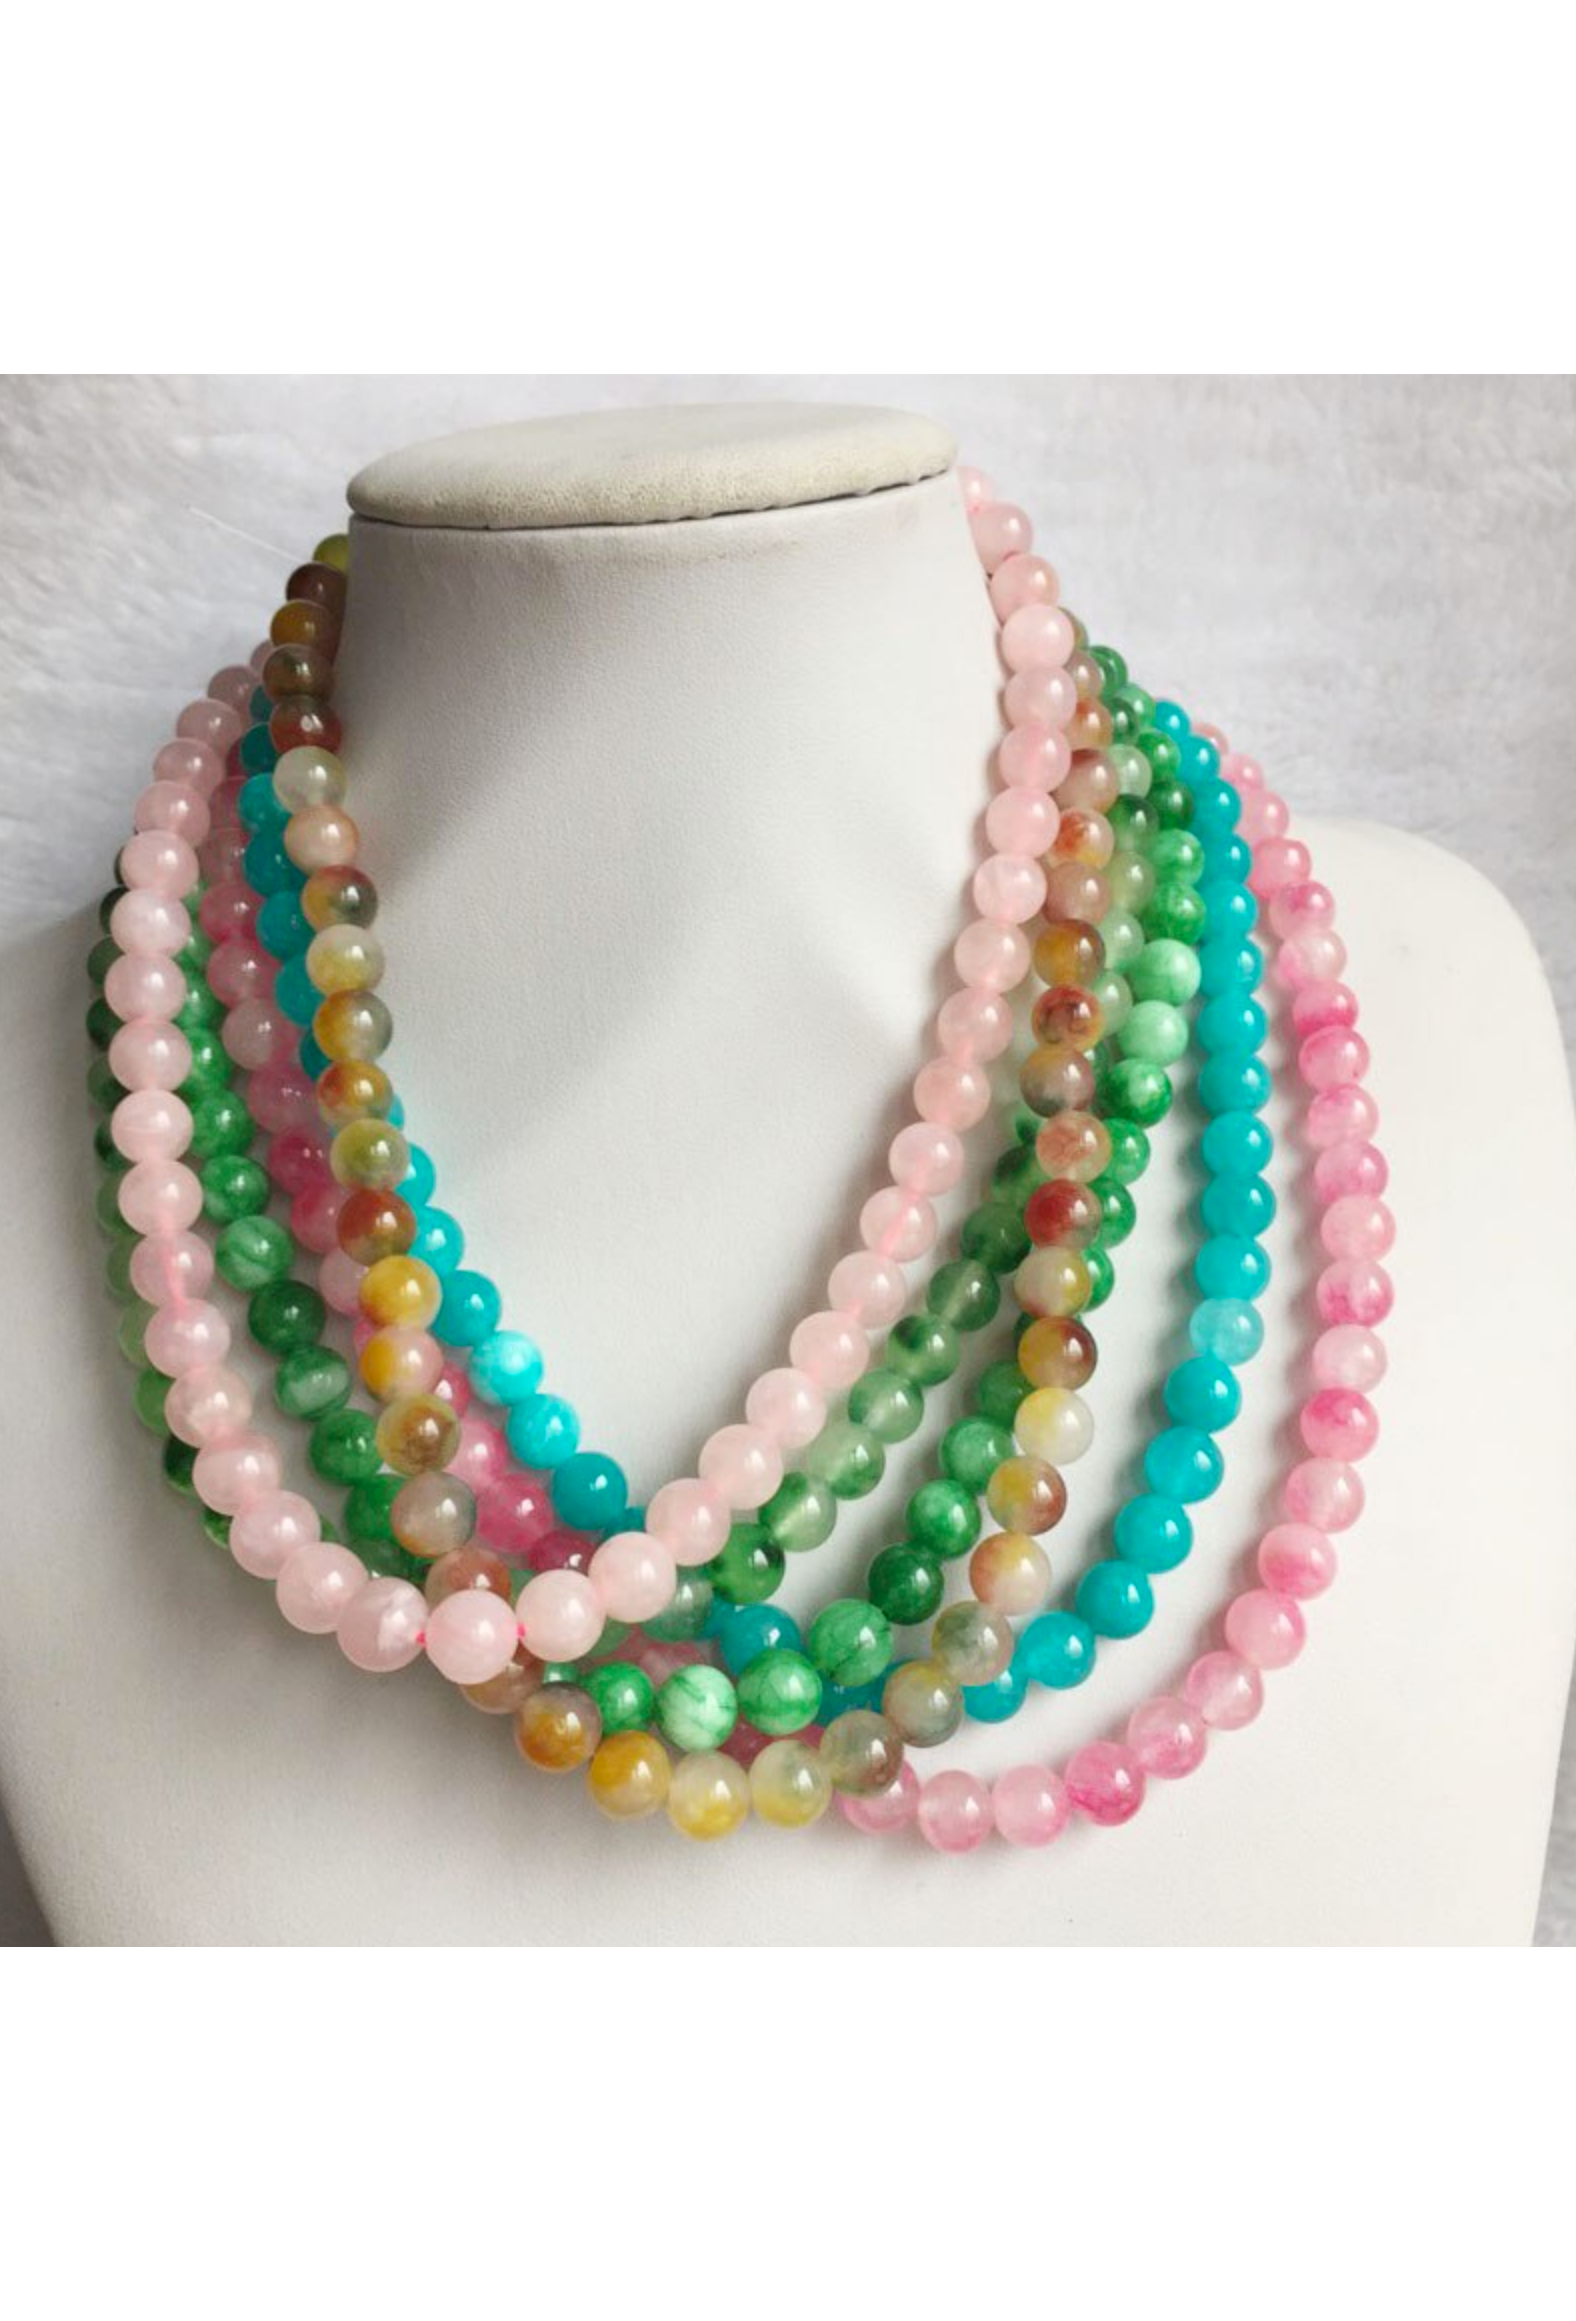 French Couleurs Necklace - J. Marin